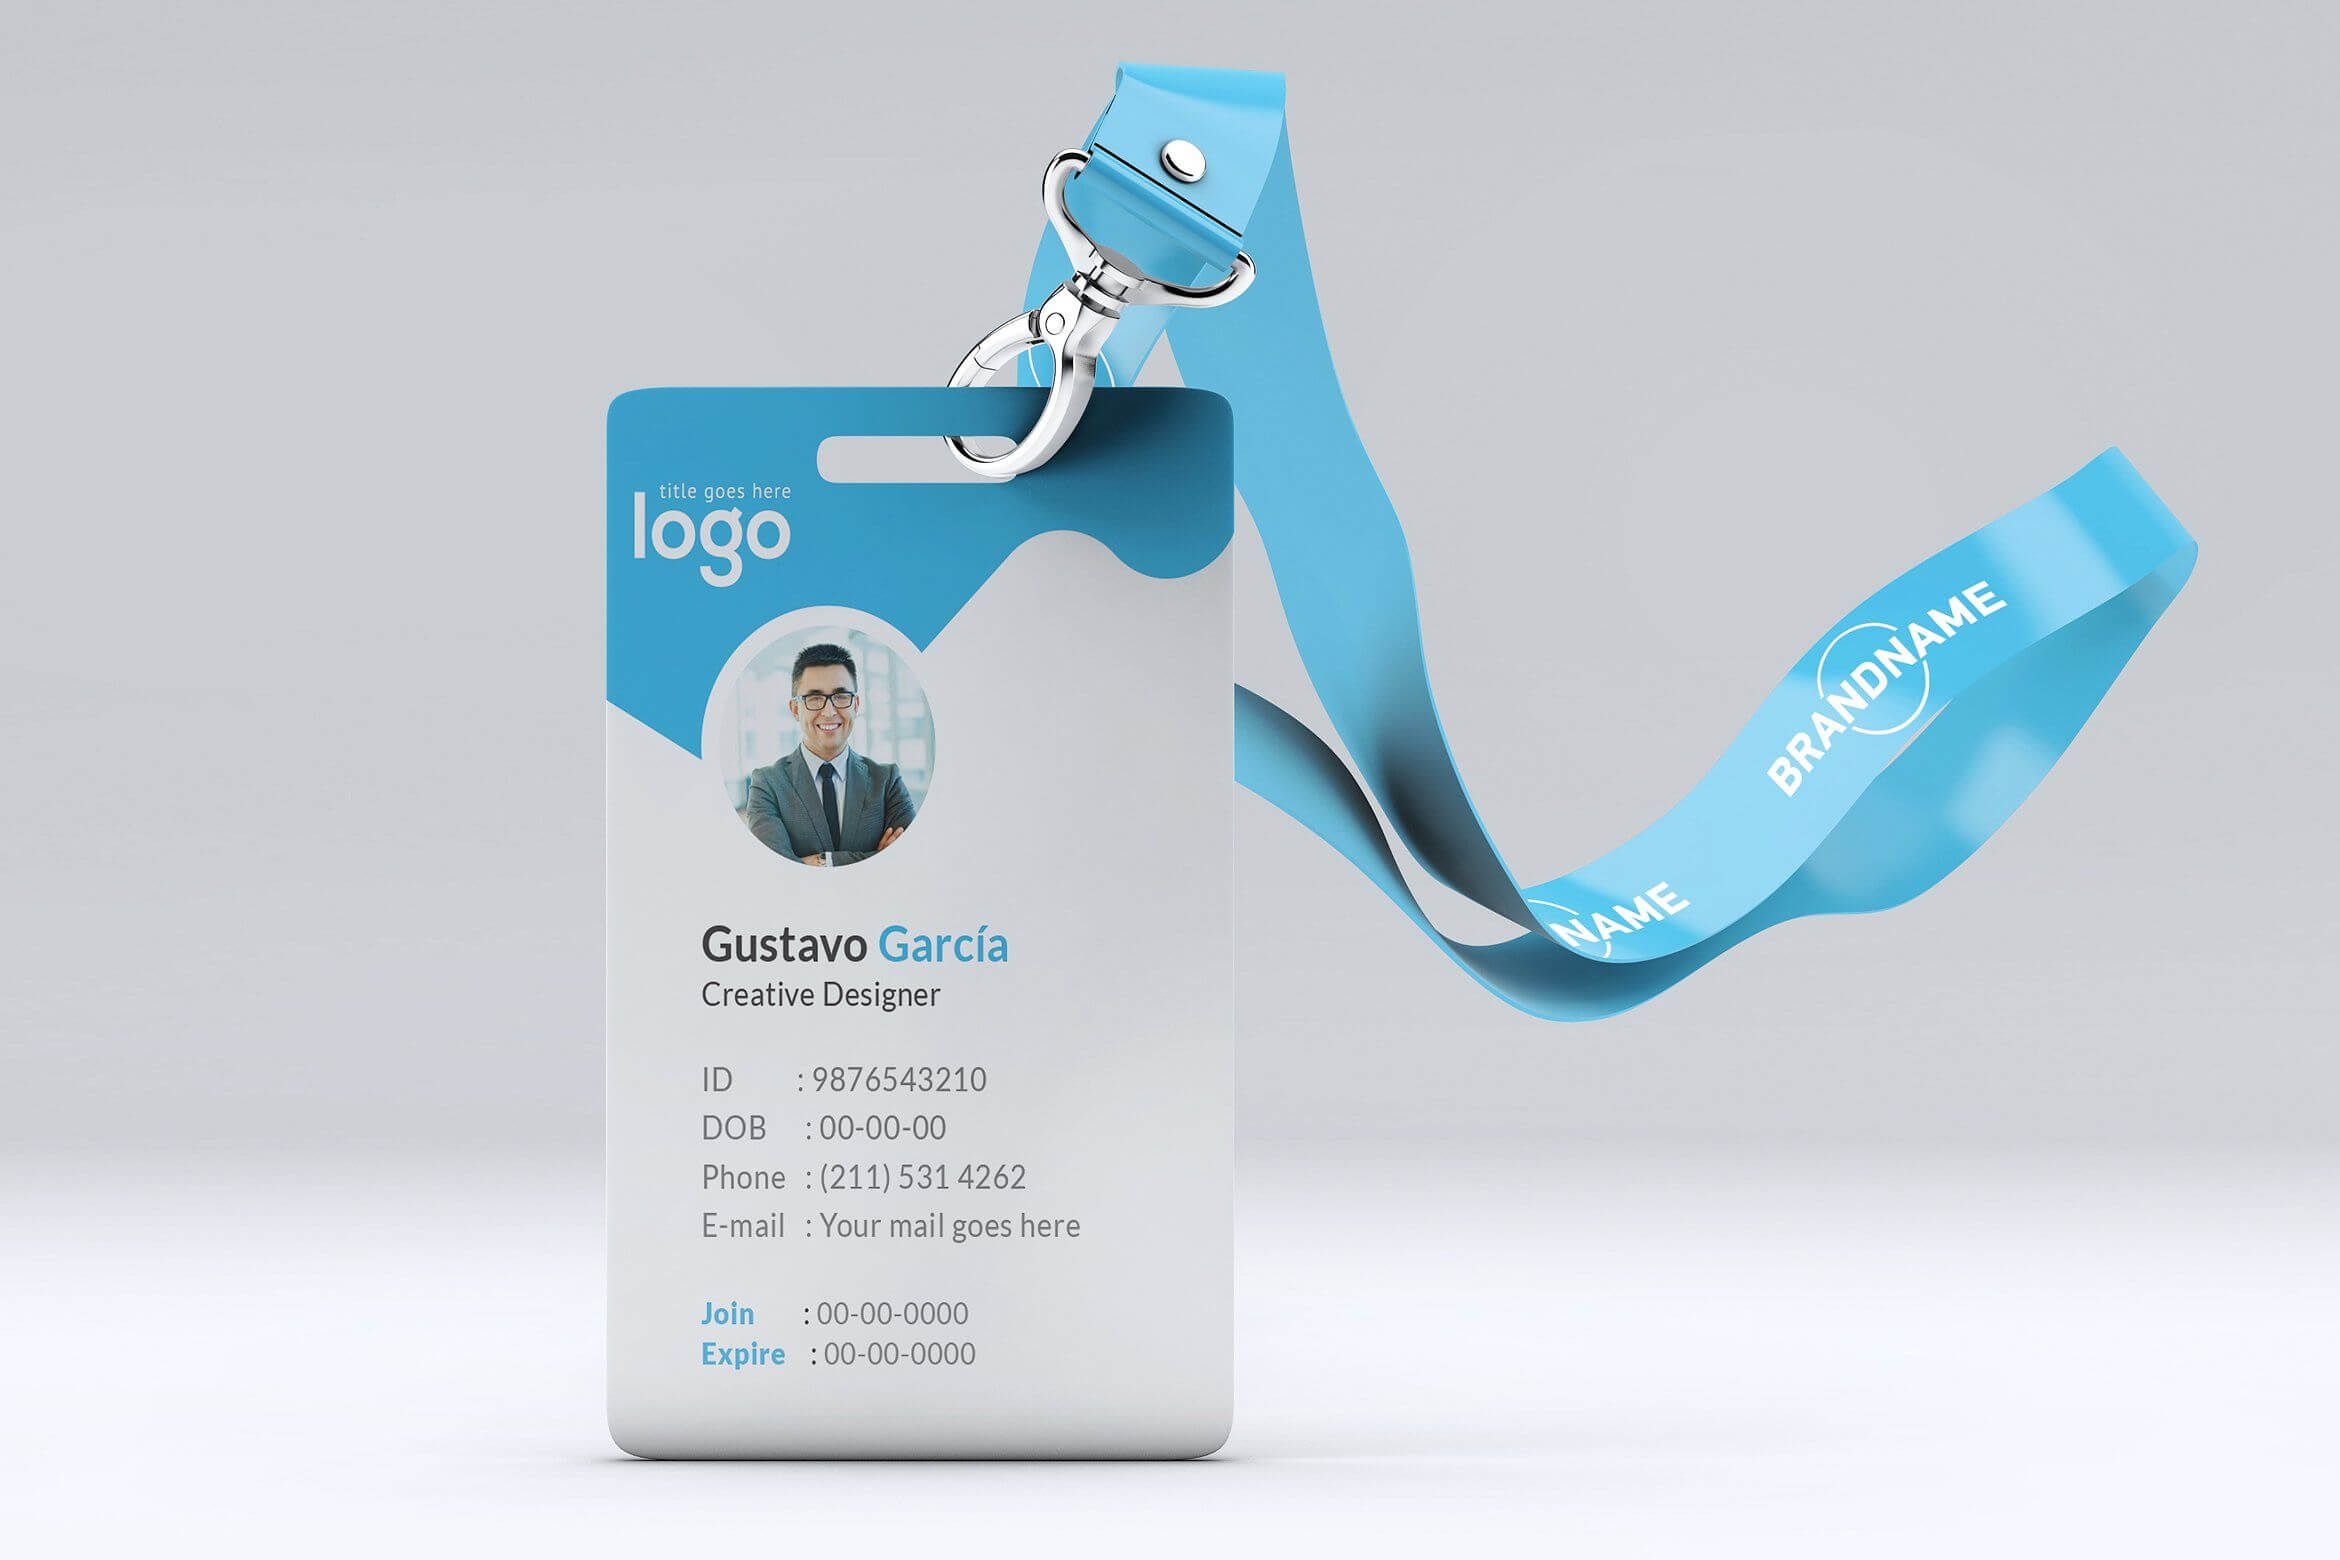 024 Id Card Templates Free Download Template As Well Regarding Template For Id Card Free Download